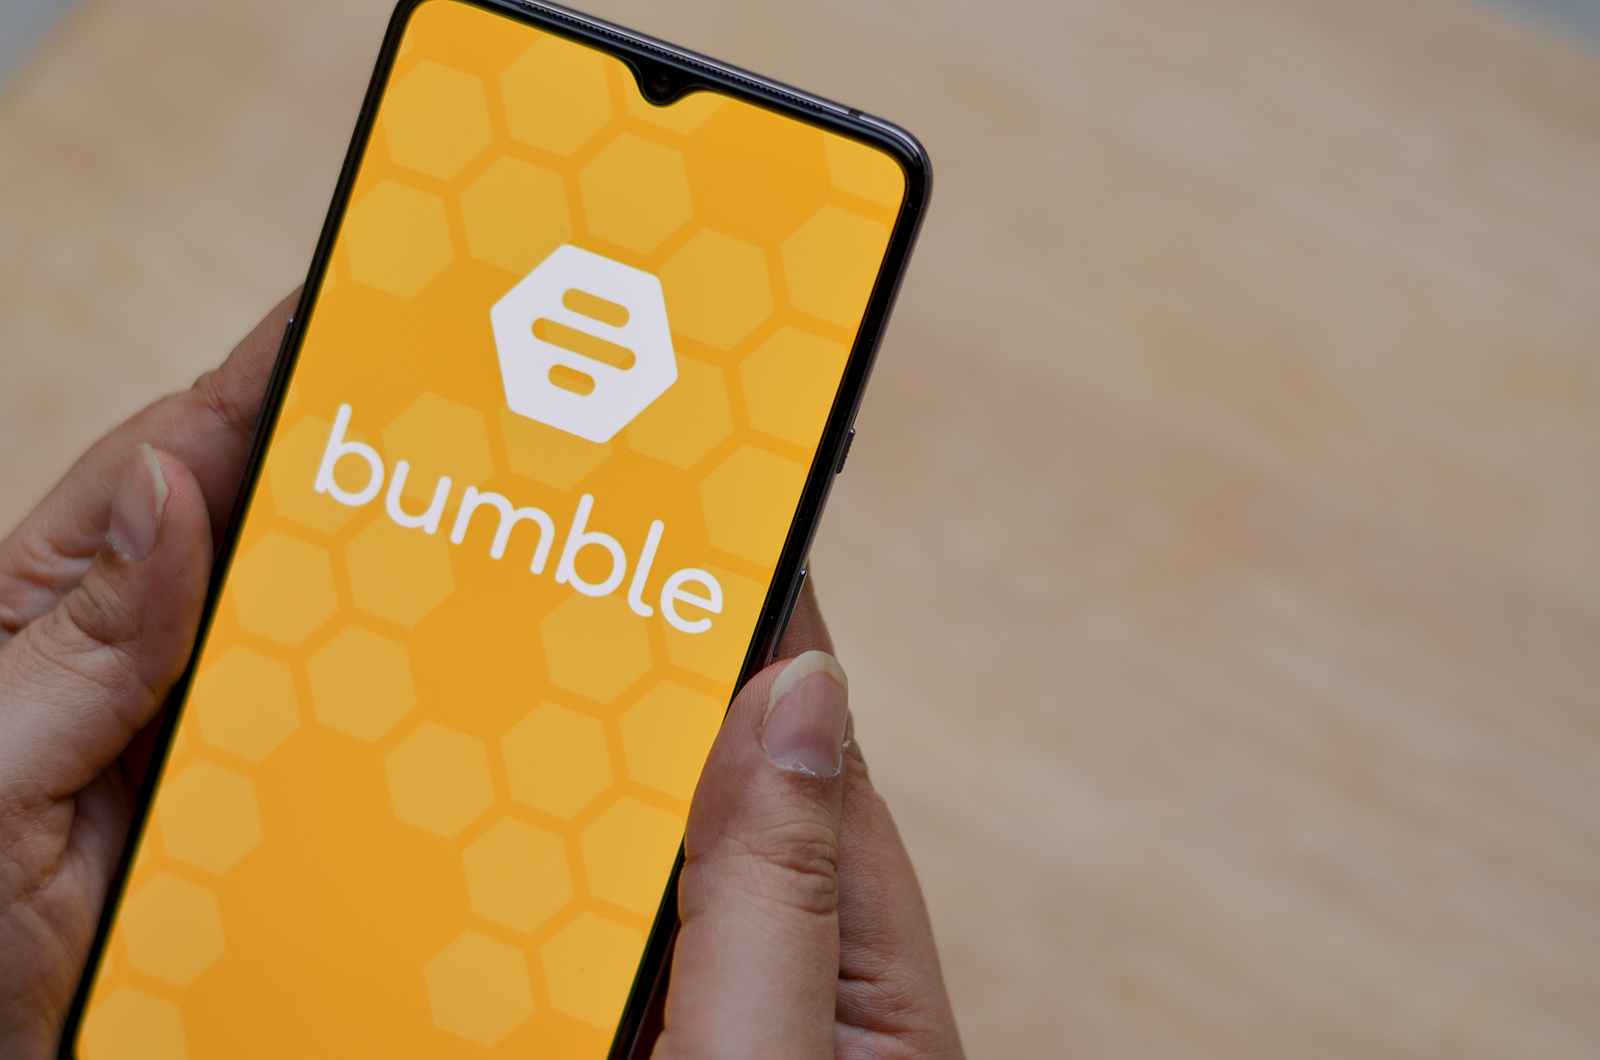 Bumble stock, BMBL stock, online dating stocks